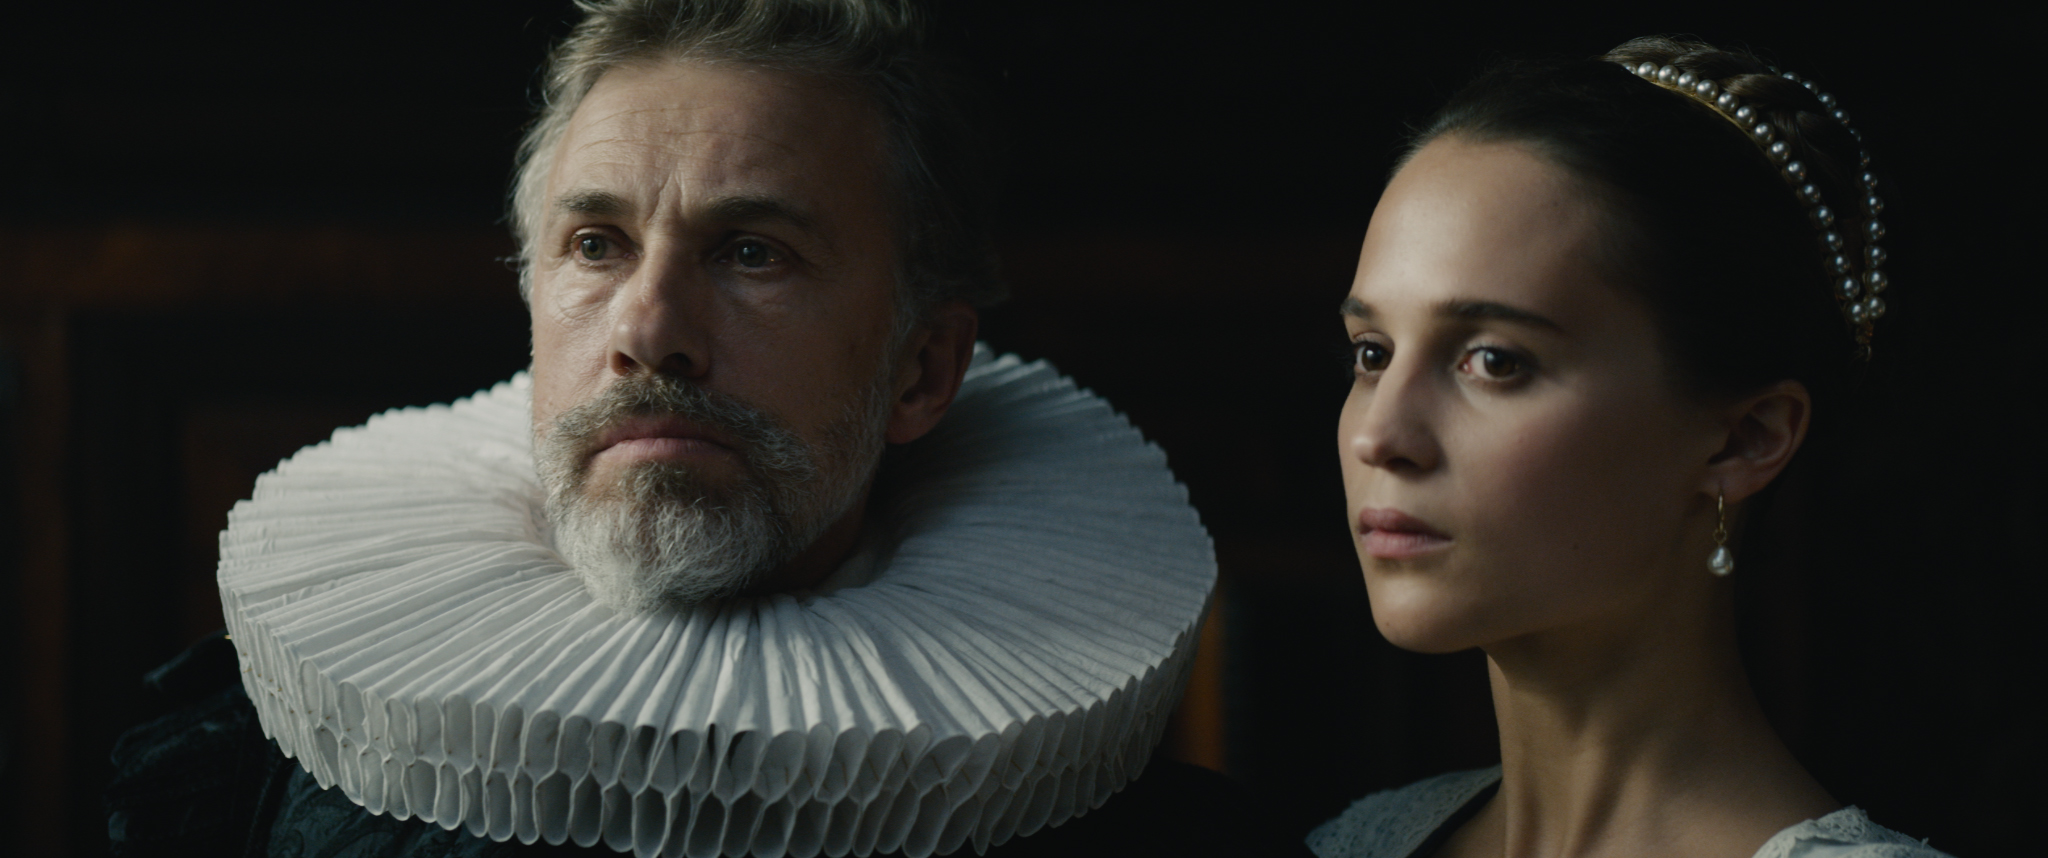 Sophia (Alicia Vikander) falls for a young artist whom her husband, Cornelis Sandvoort (Christoph Waltz), commissions to paint her portrait in the feature Tulip Fever, shot by cinematographer Eigil Bryld.